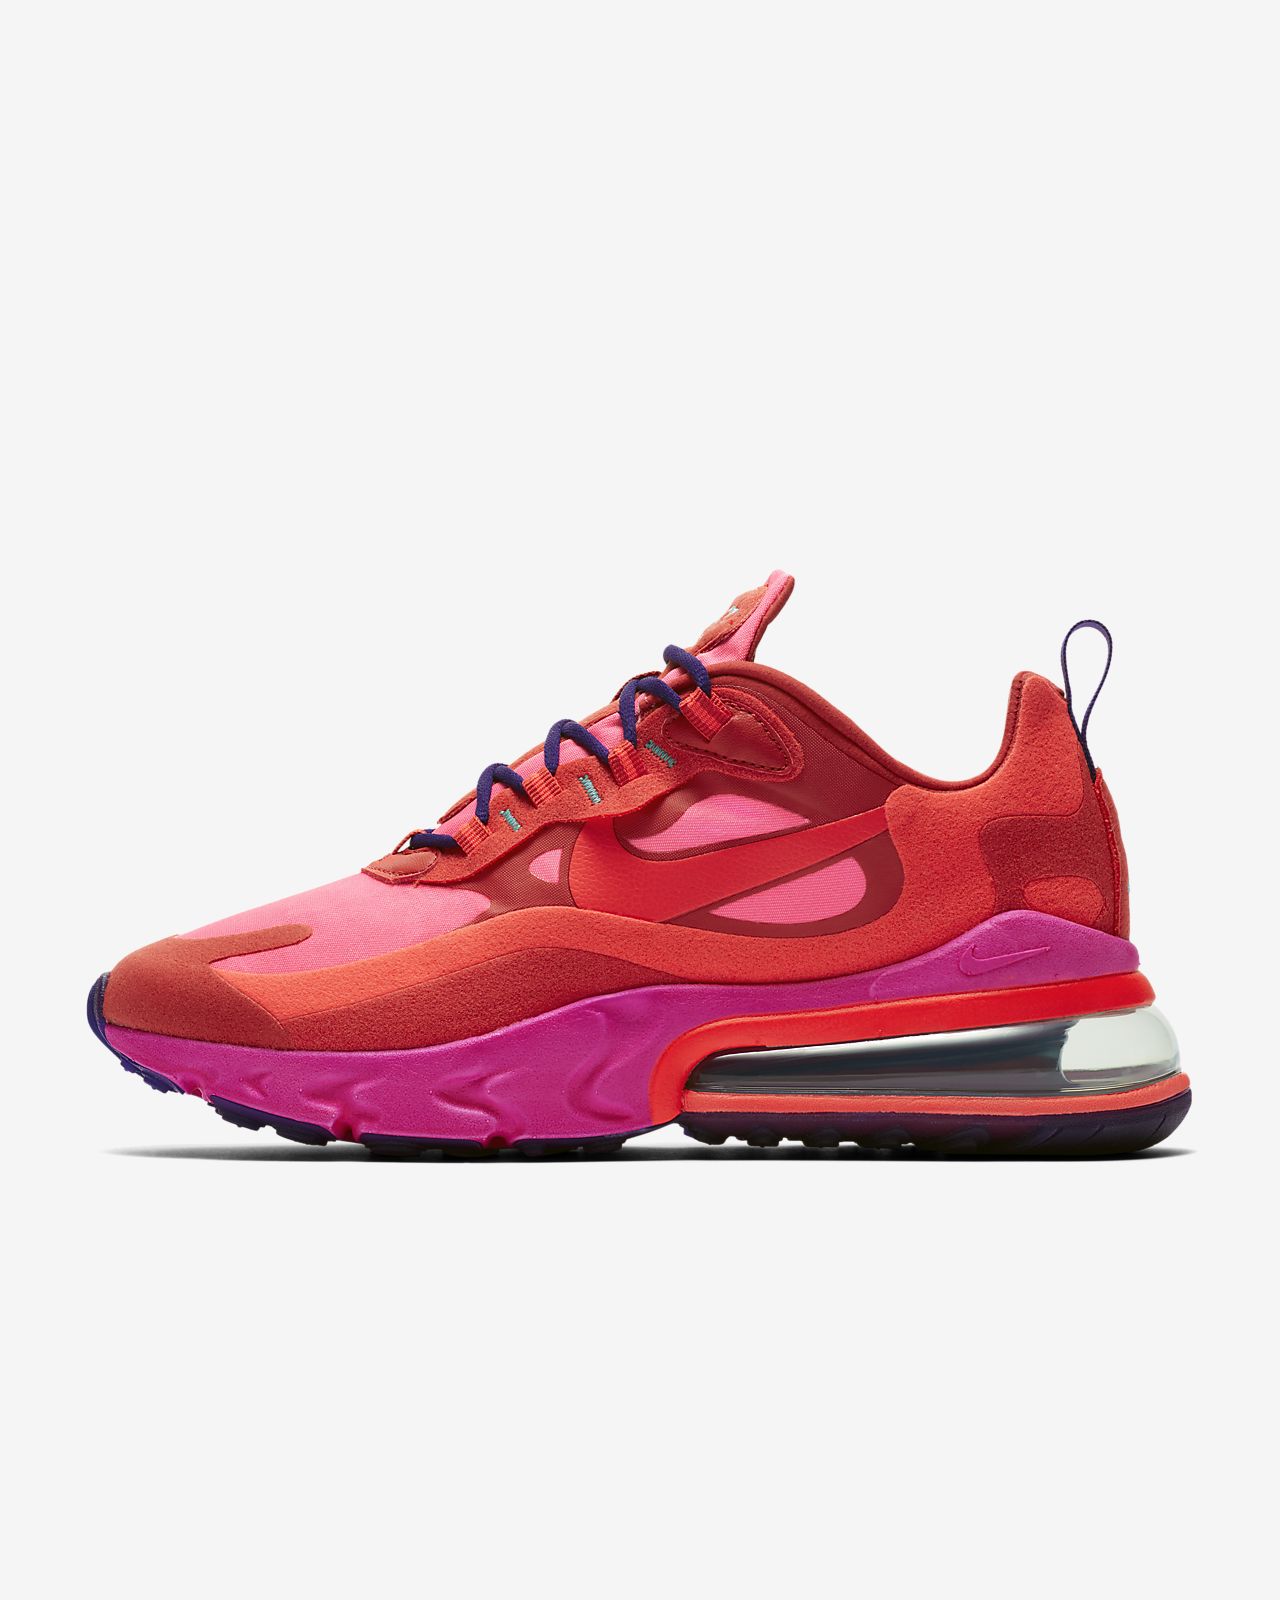 red and pink nike 270